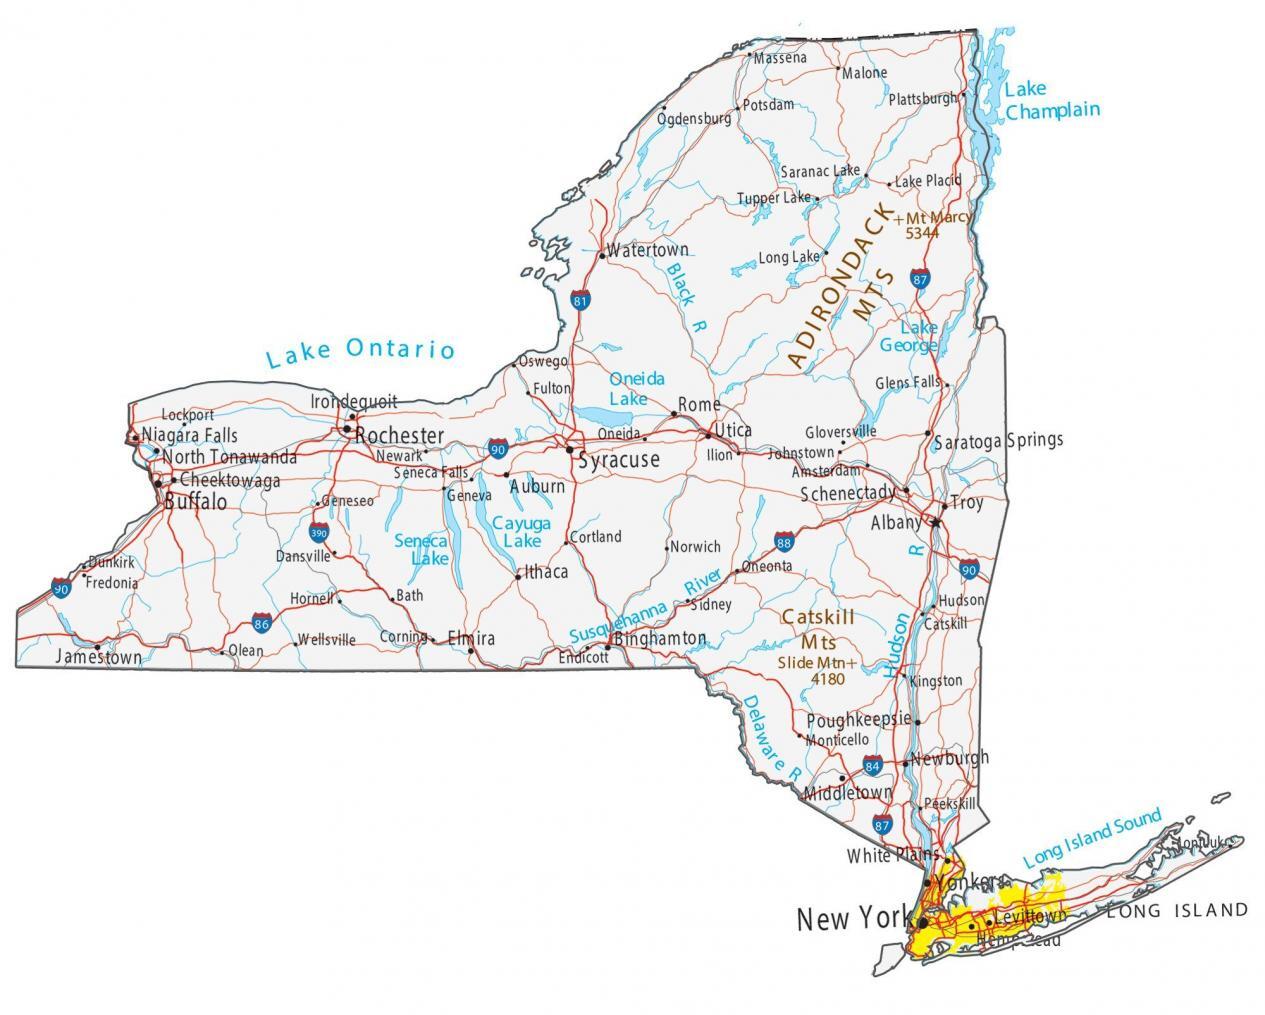 Map of New York - Cities and Roads - GIS Geography